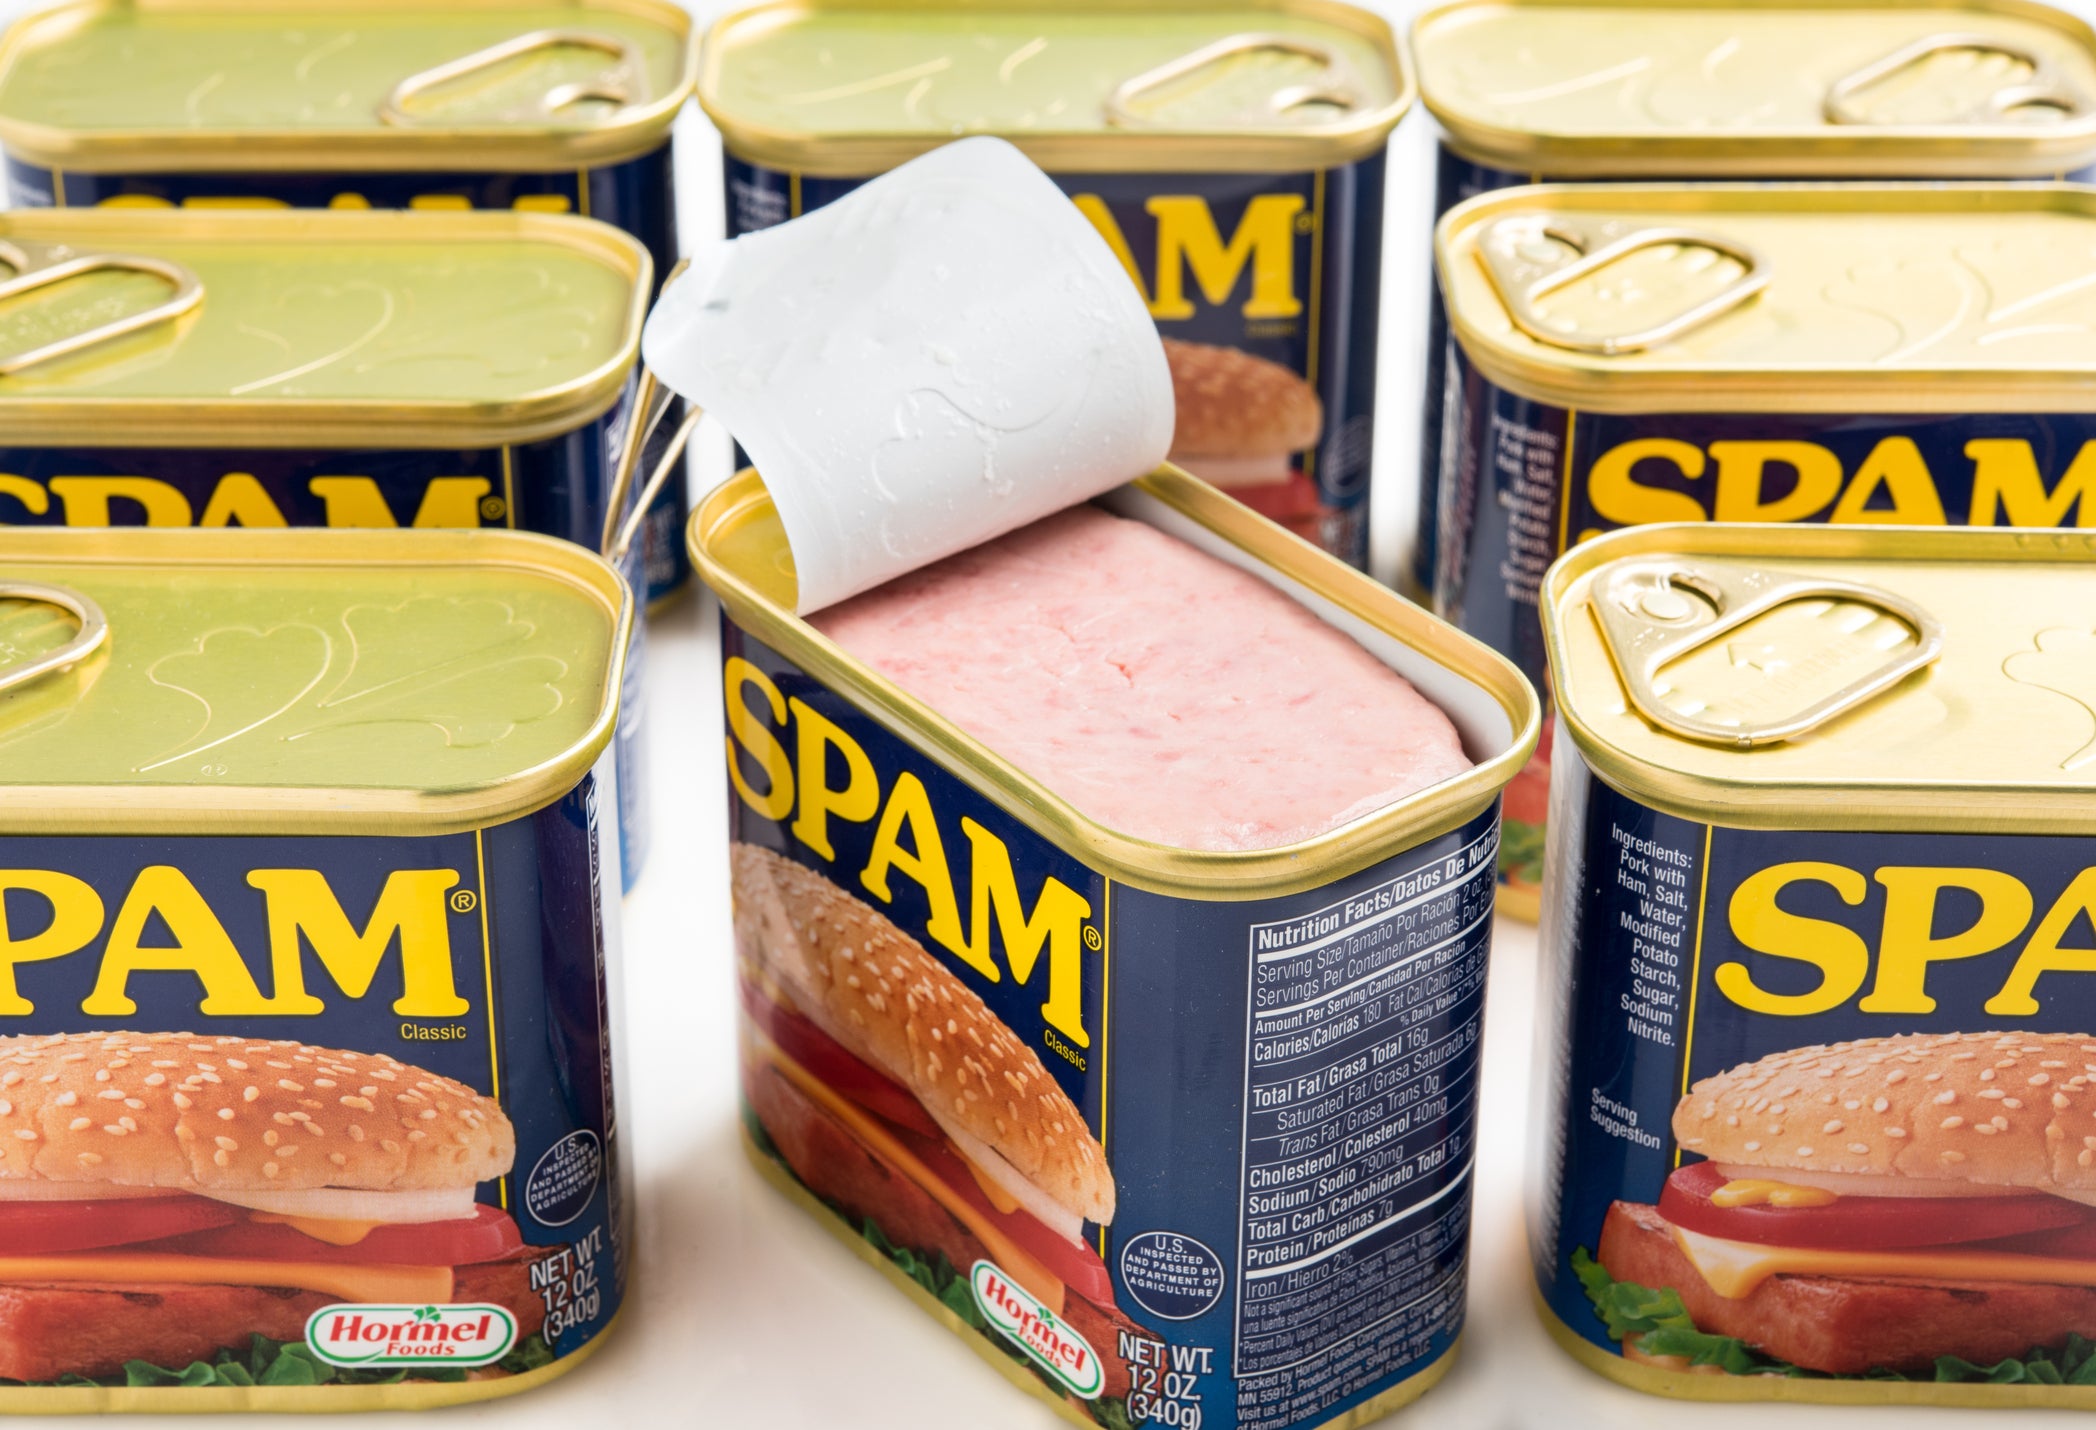 Can-do attitude: the pork product was first produced in 1937